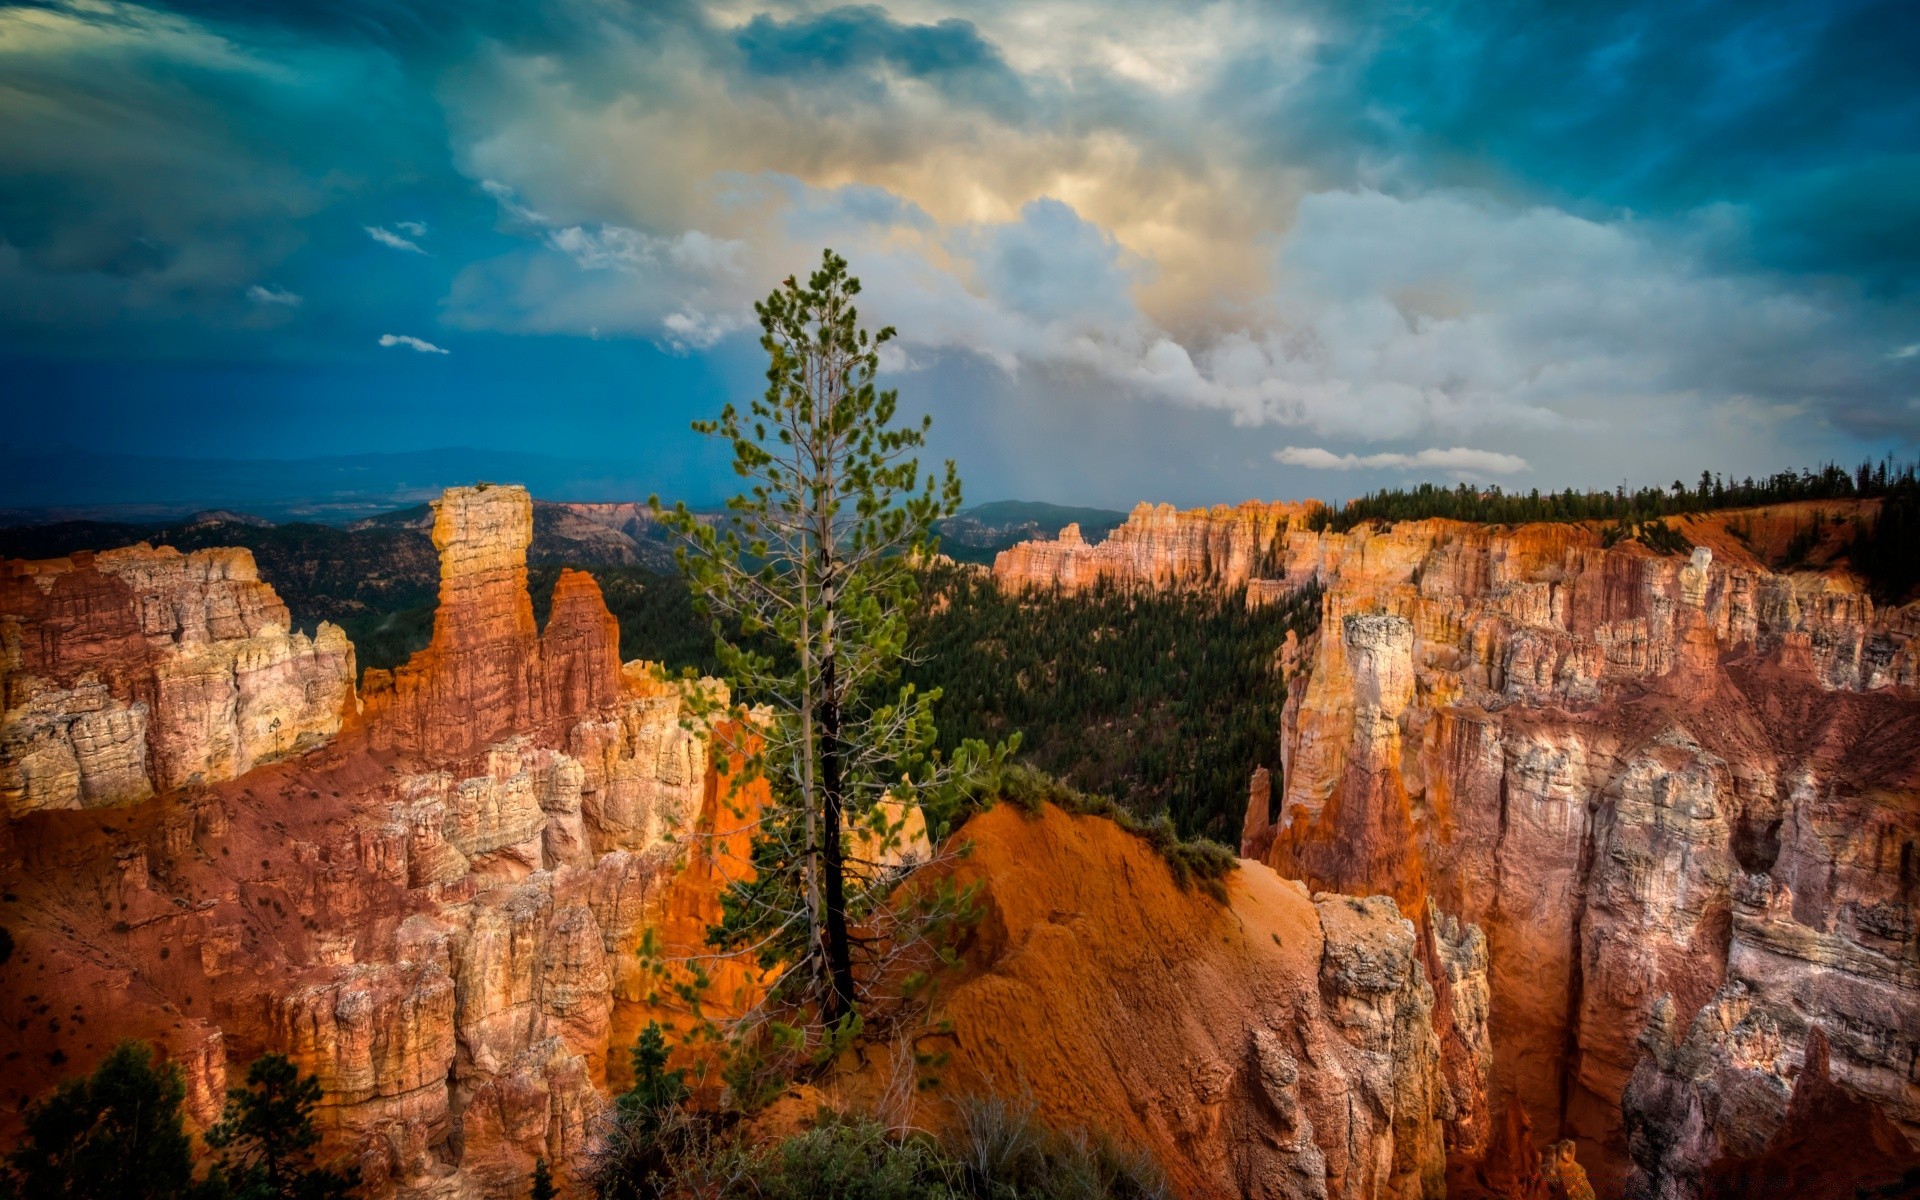 america outdoors travel sandstone geology nature canyon sunset landscape rock sky erosion scenic cliff dawn park evening